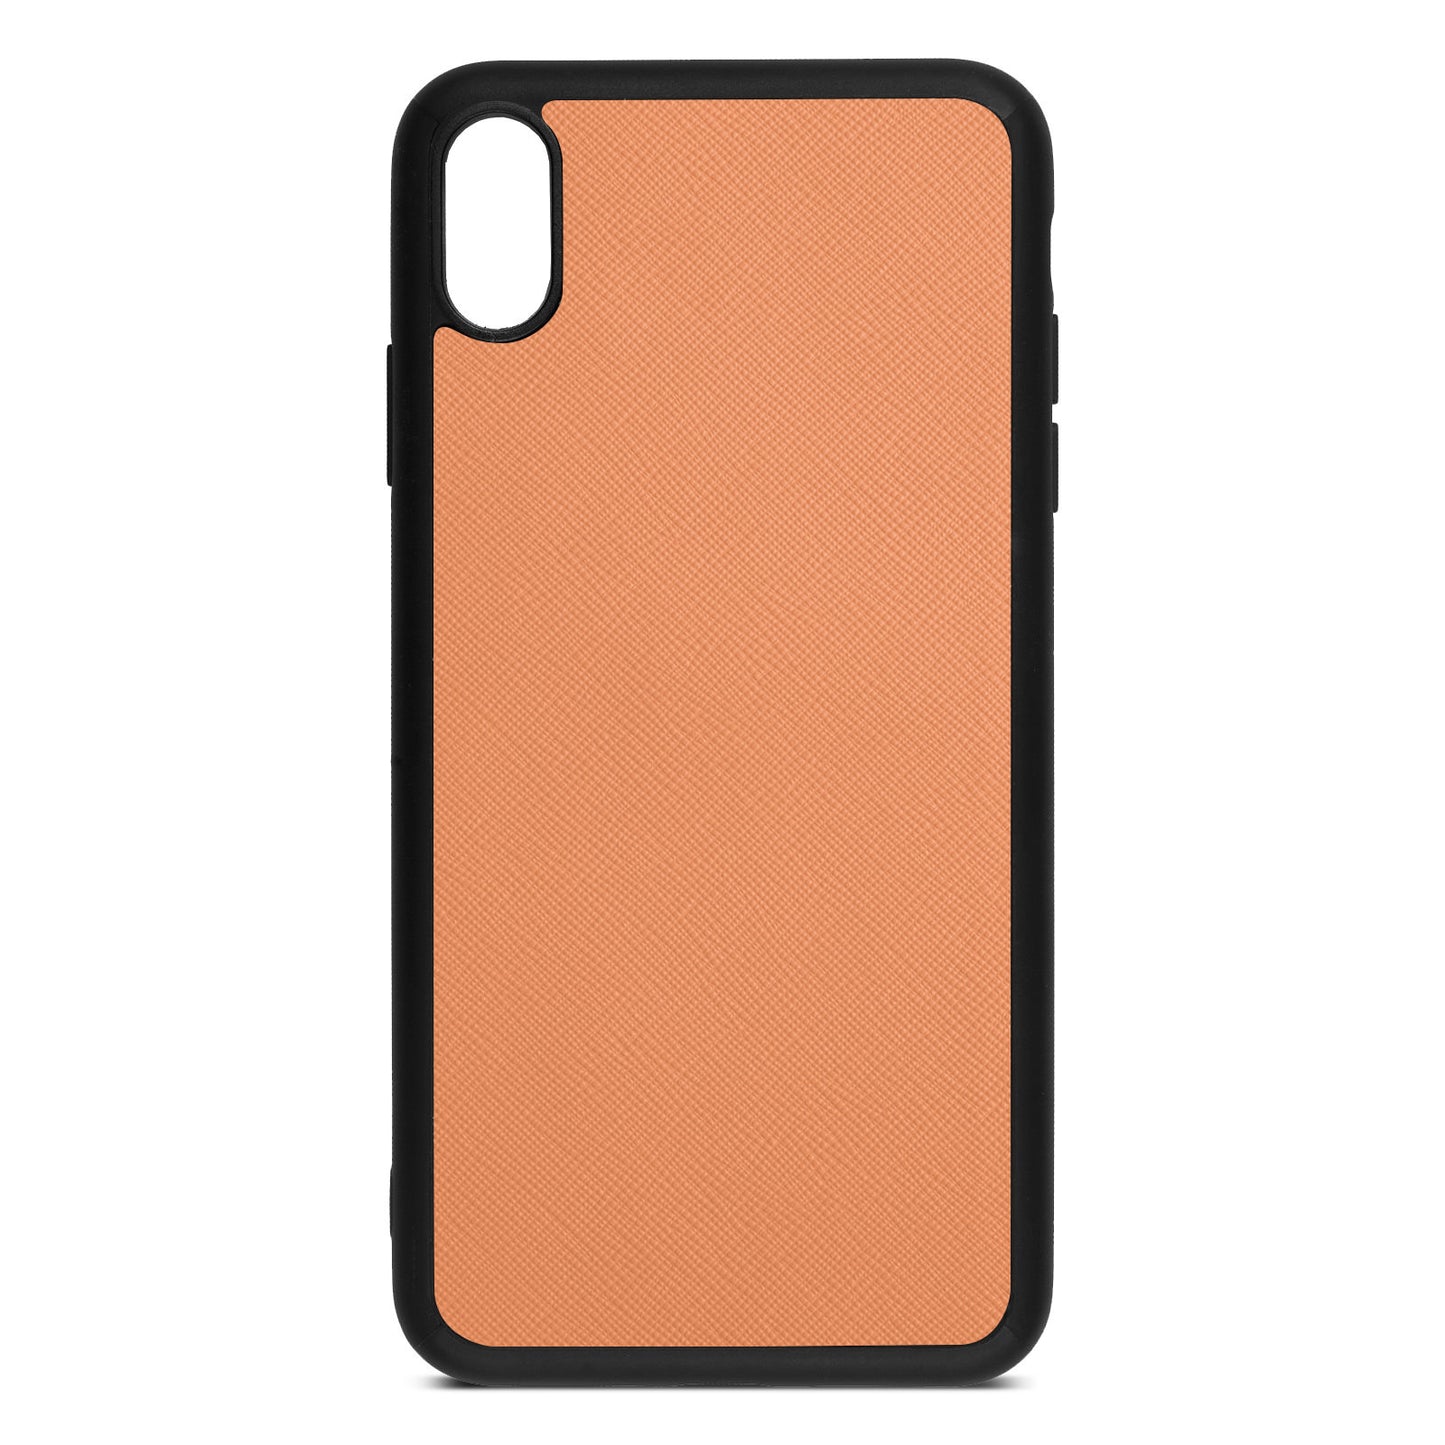 Blank Personalised Orange Saffiano Leather iPhone XS Max Case